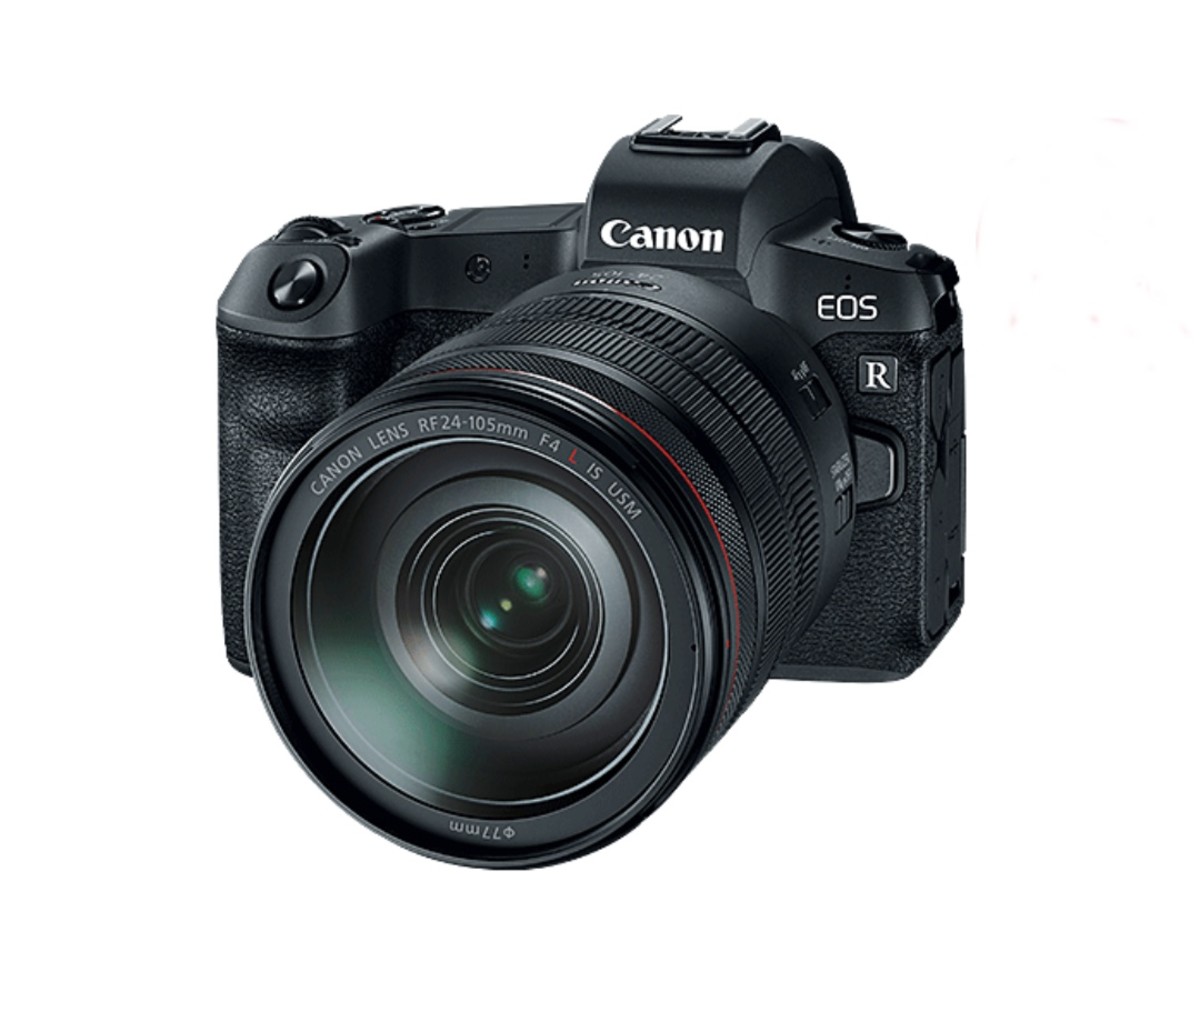 The Canon EOS R is a photography workhorse will capture any images you'd like.